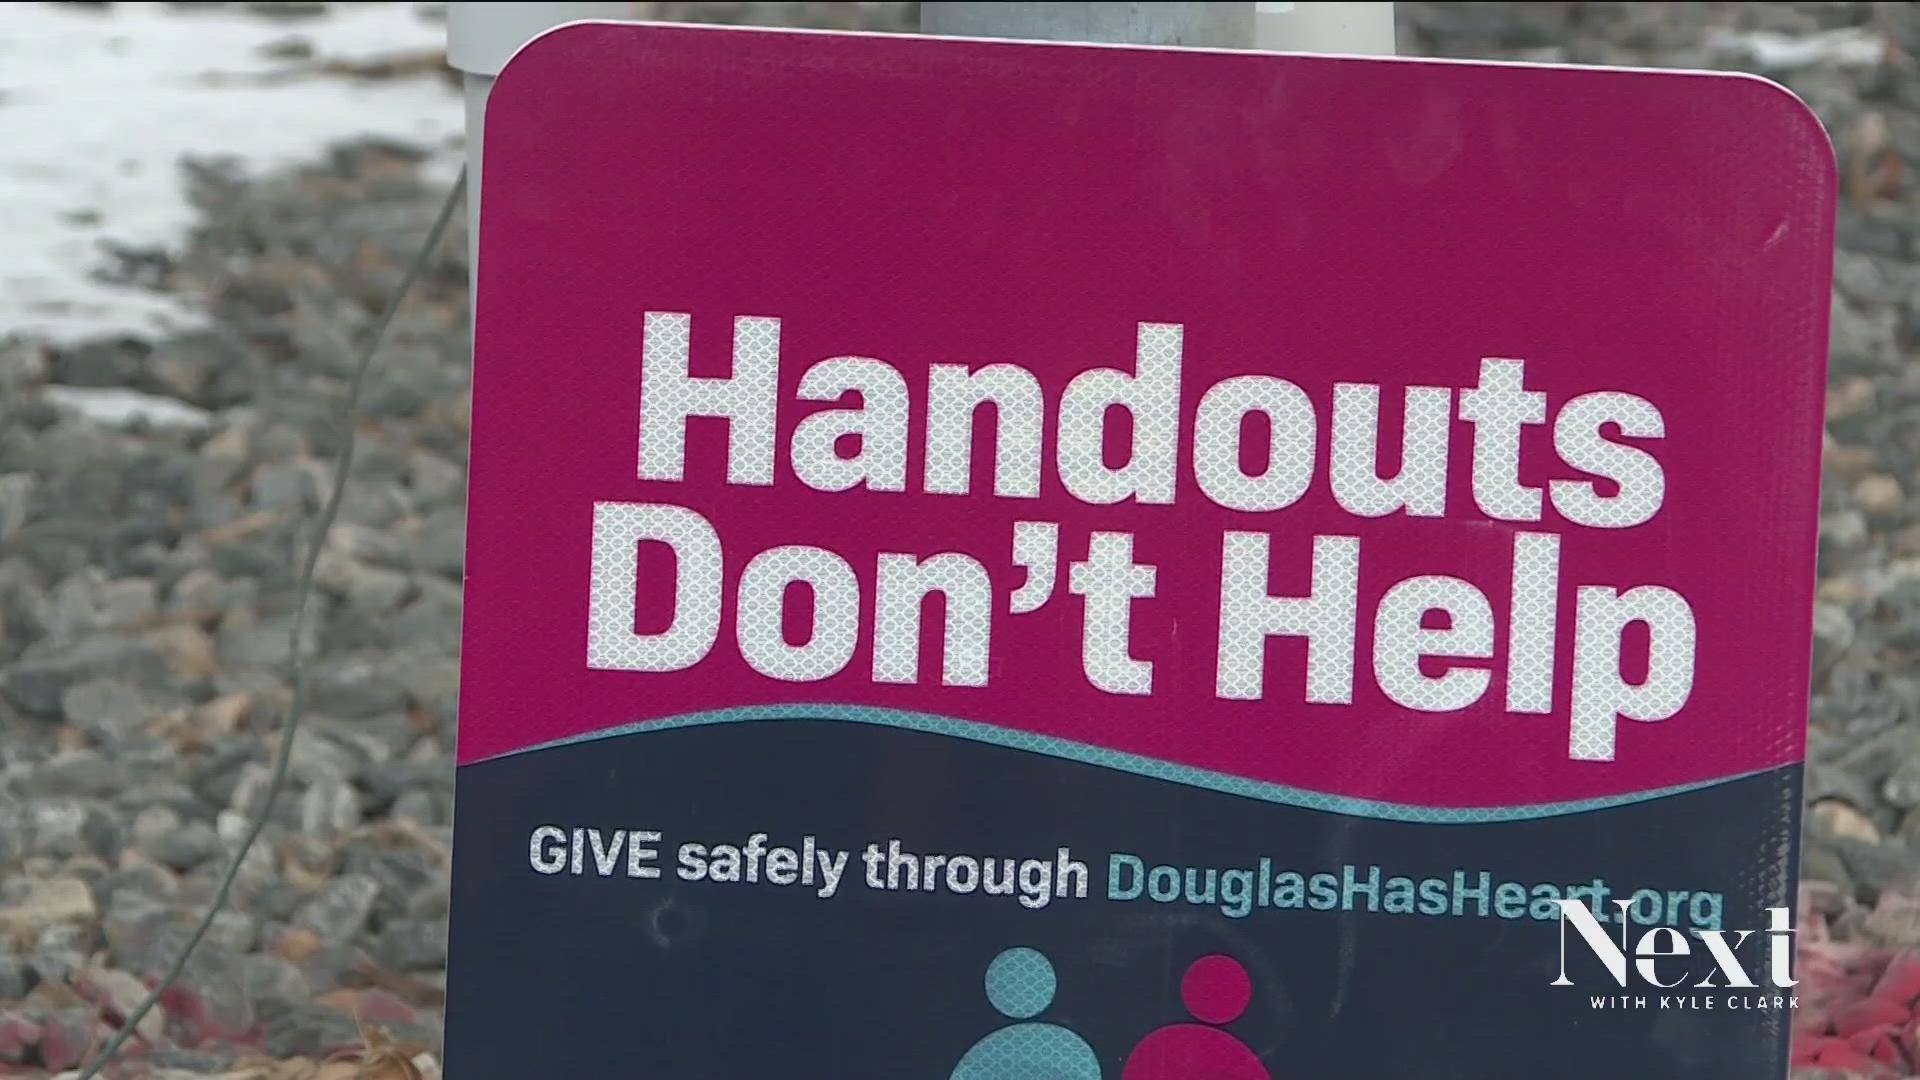 Douglas County is trying to tell people handouts don't help when it comes to those experiencing homelessness, citing public safety concerns.